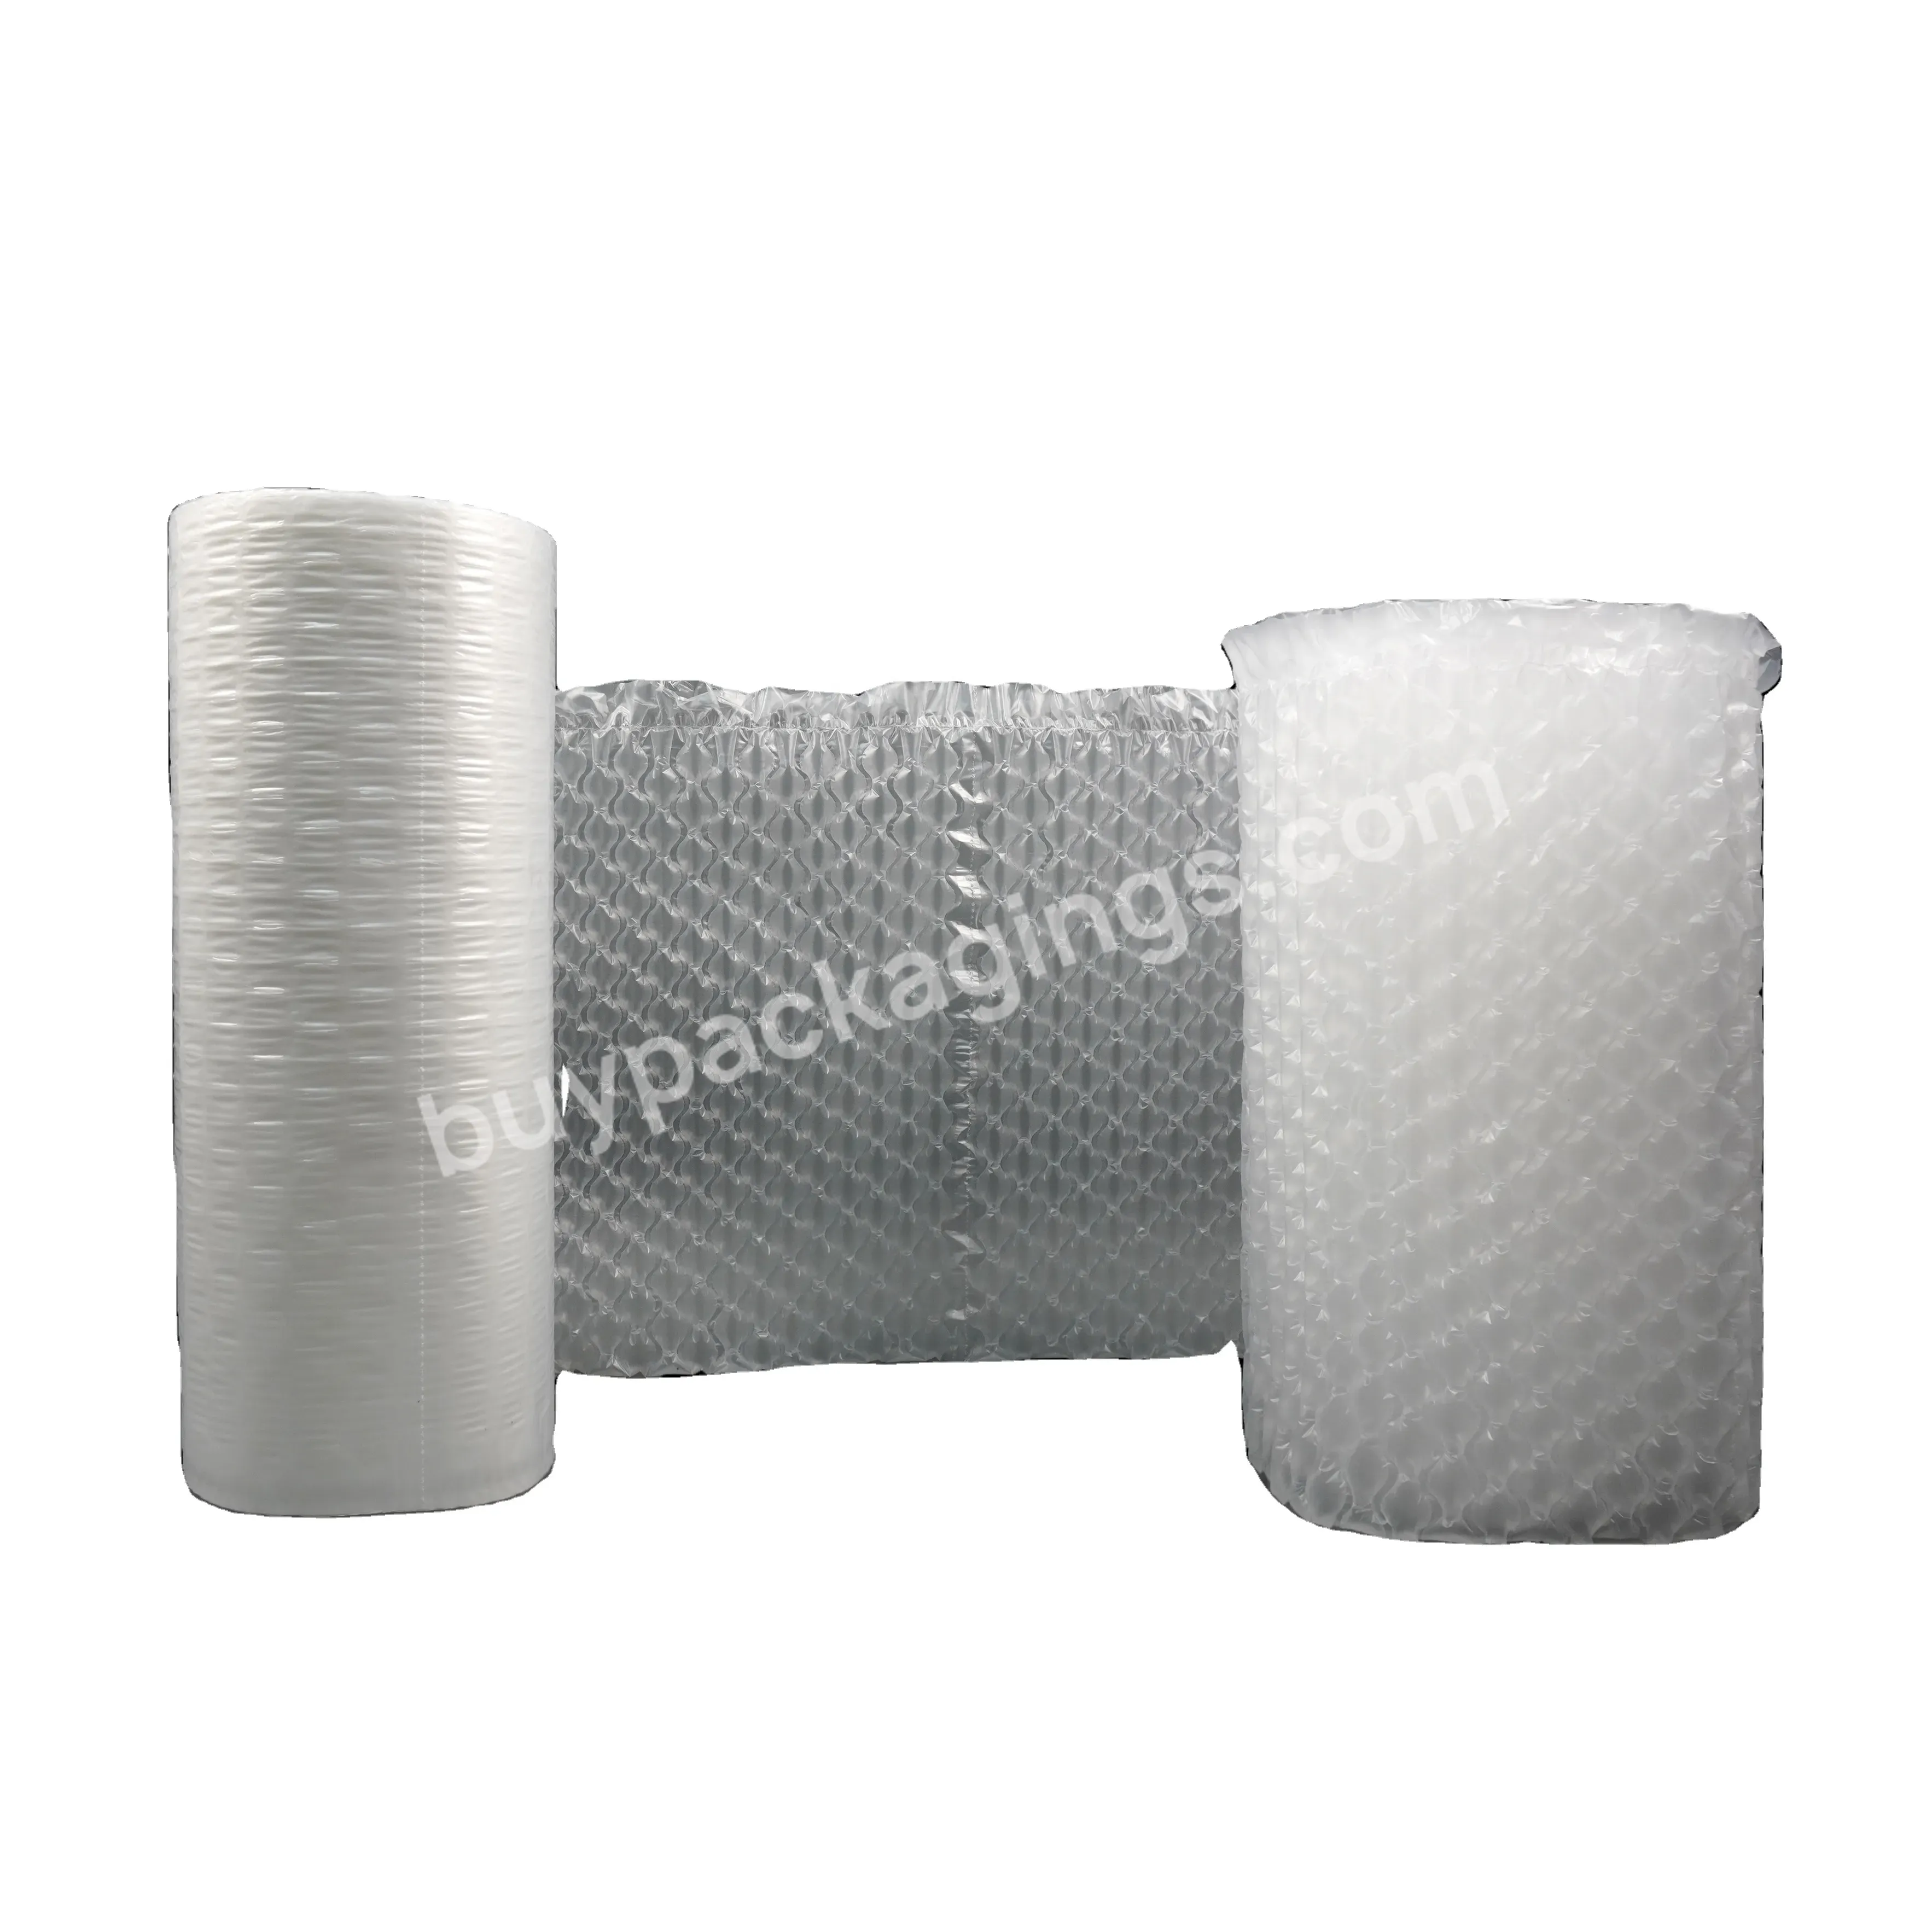 Shockproof Packaging Air Bubble Cushion Transport Protective Packaging - Buy Transport Packaging,Shockproof Packaging,Bubble Package.